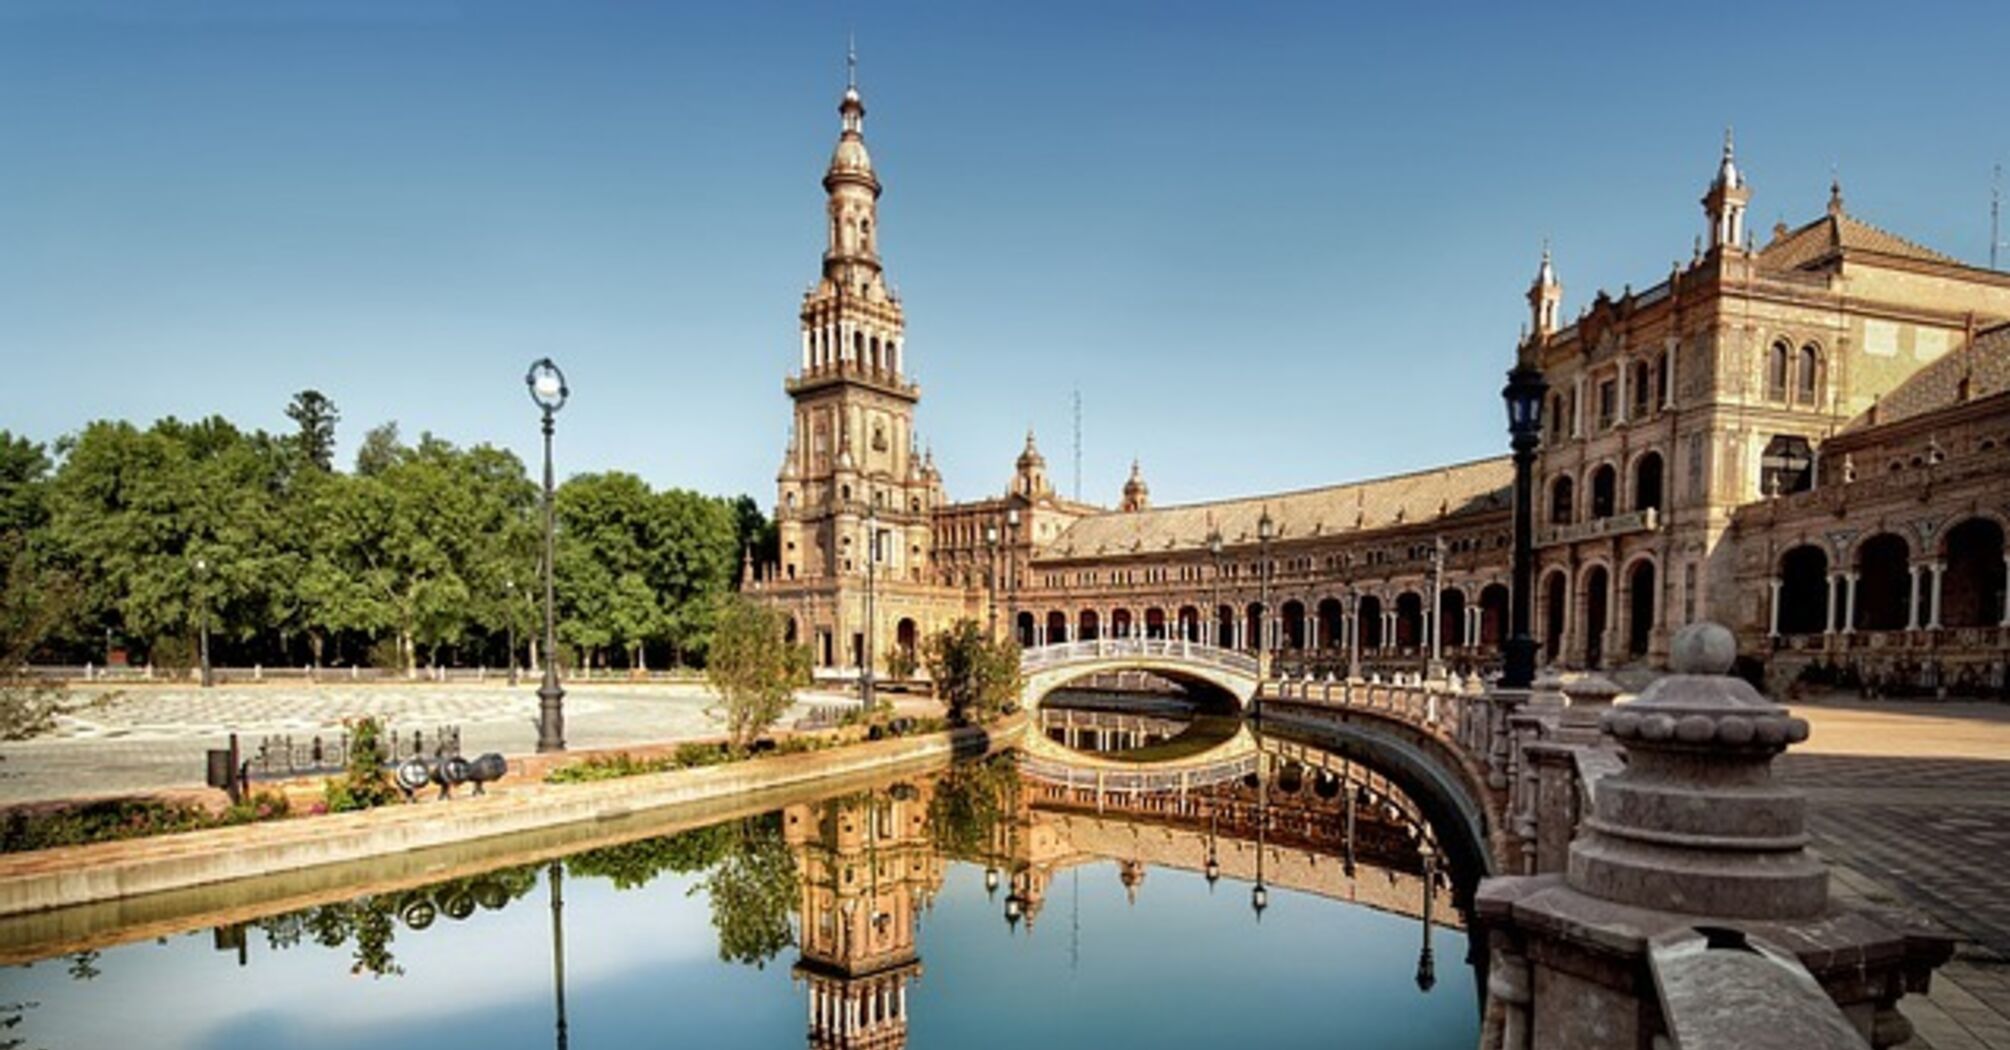 Seville is the perfect vacation destination